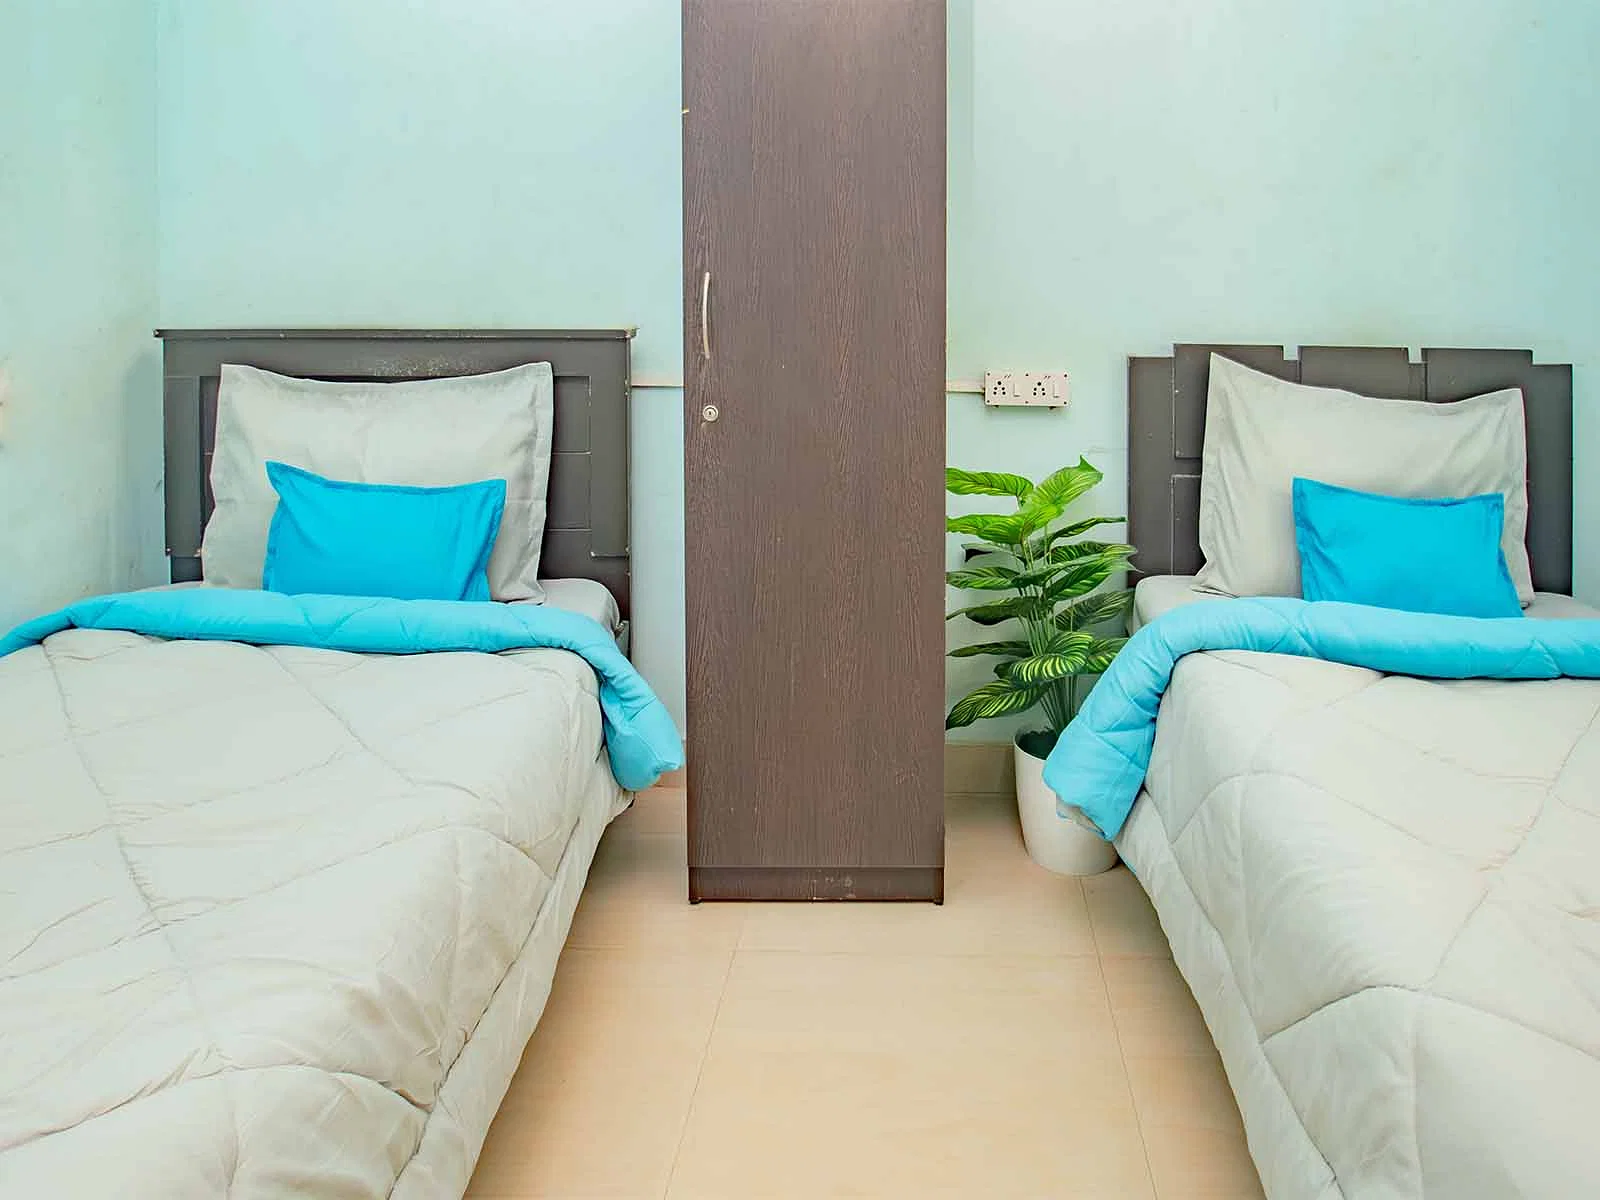 budget-friendly PGs and hostels for unisex with single rooms with daily hopusekeeping-Zolo Avni